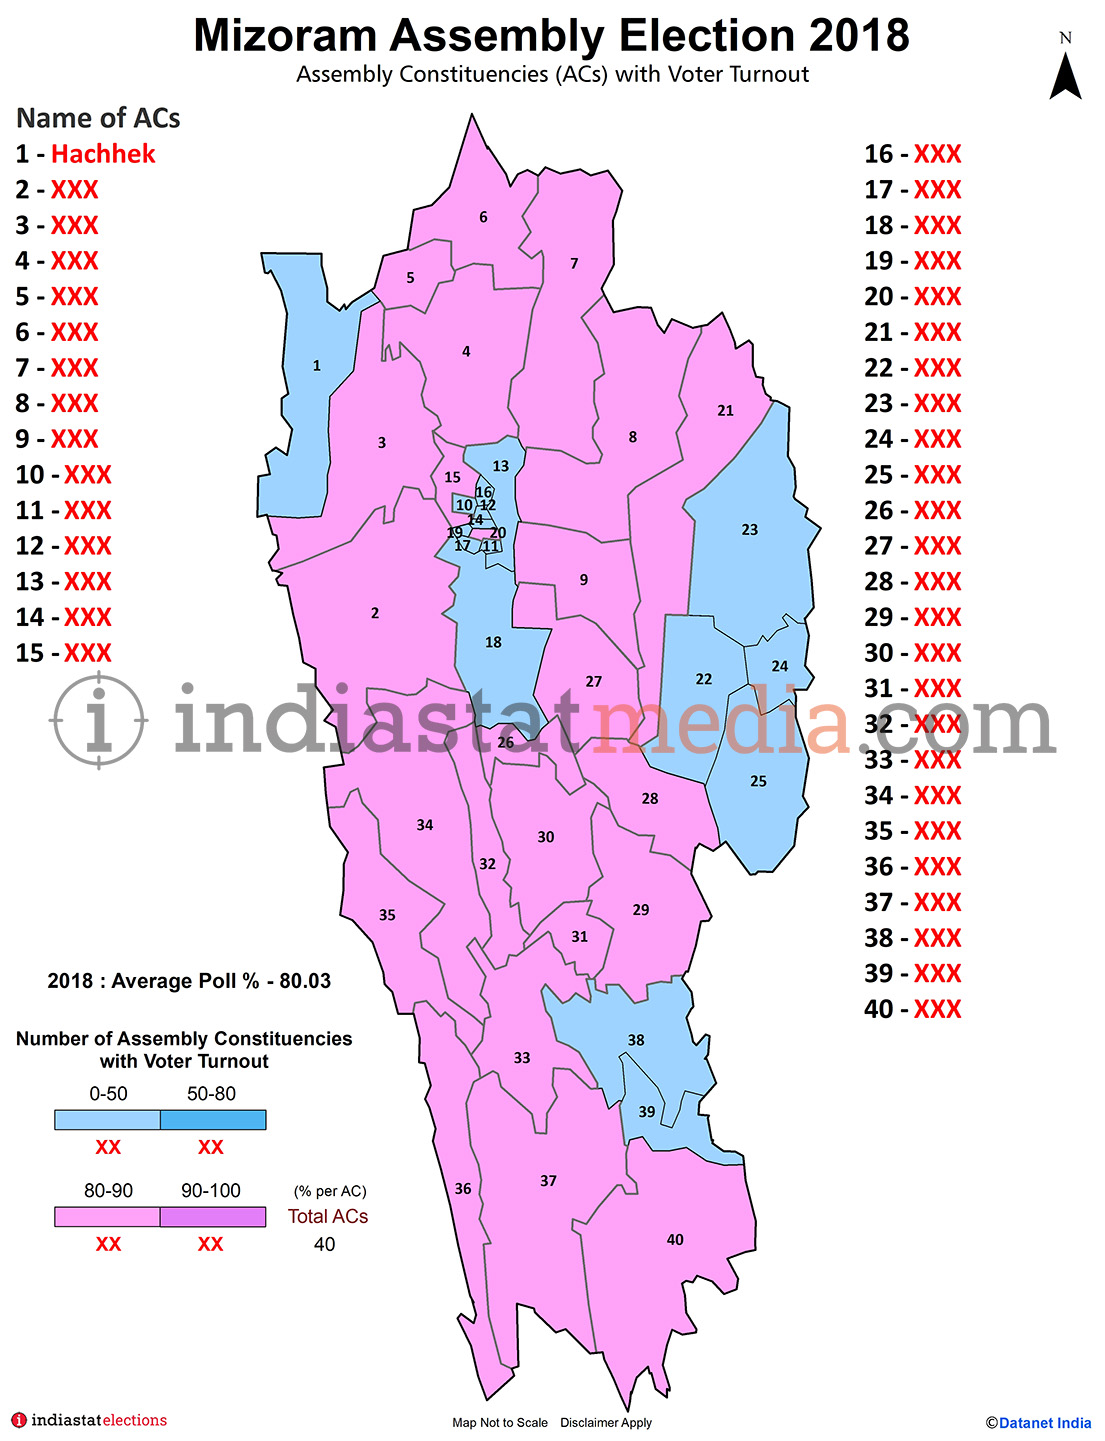 Assembly Constituencies (ACs) with Voter Turnout in Mizoram (Assembly Election - 2018)